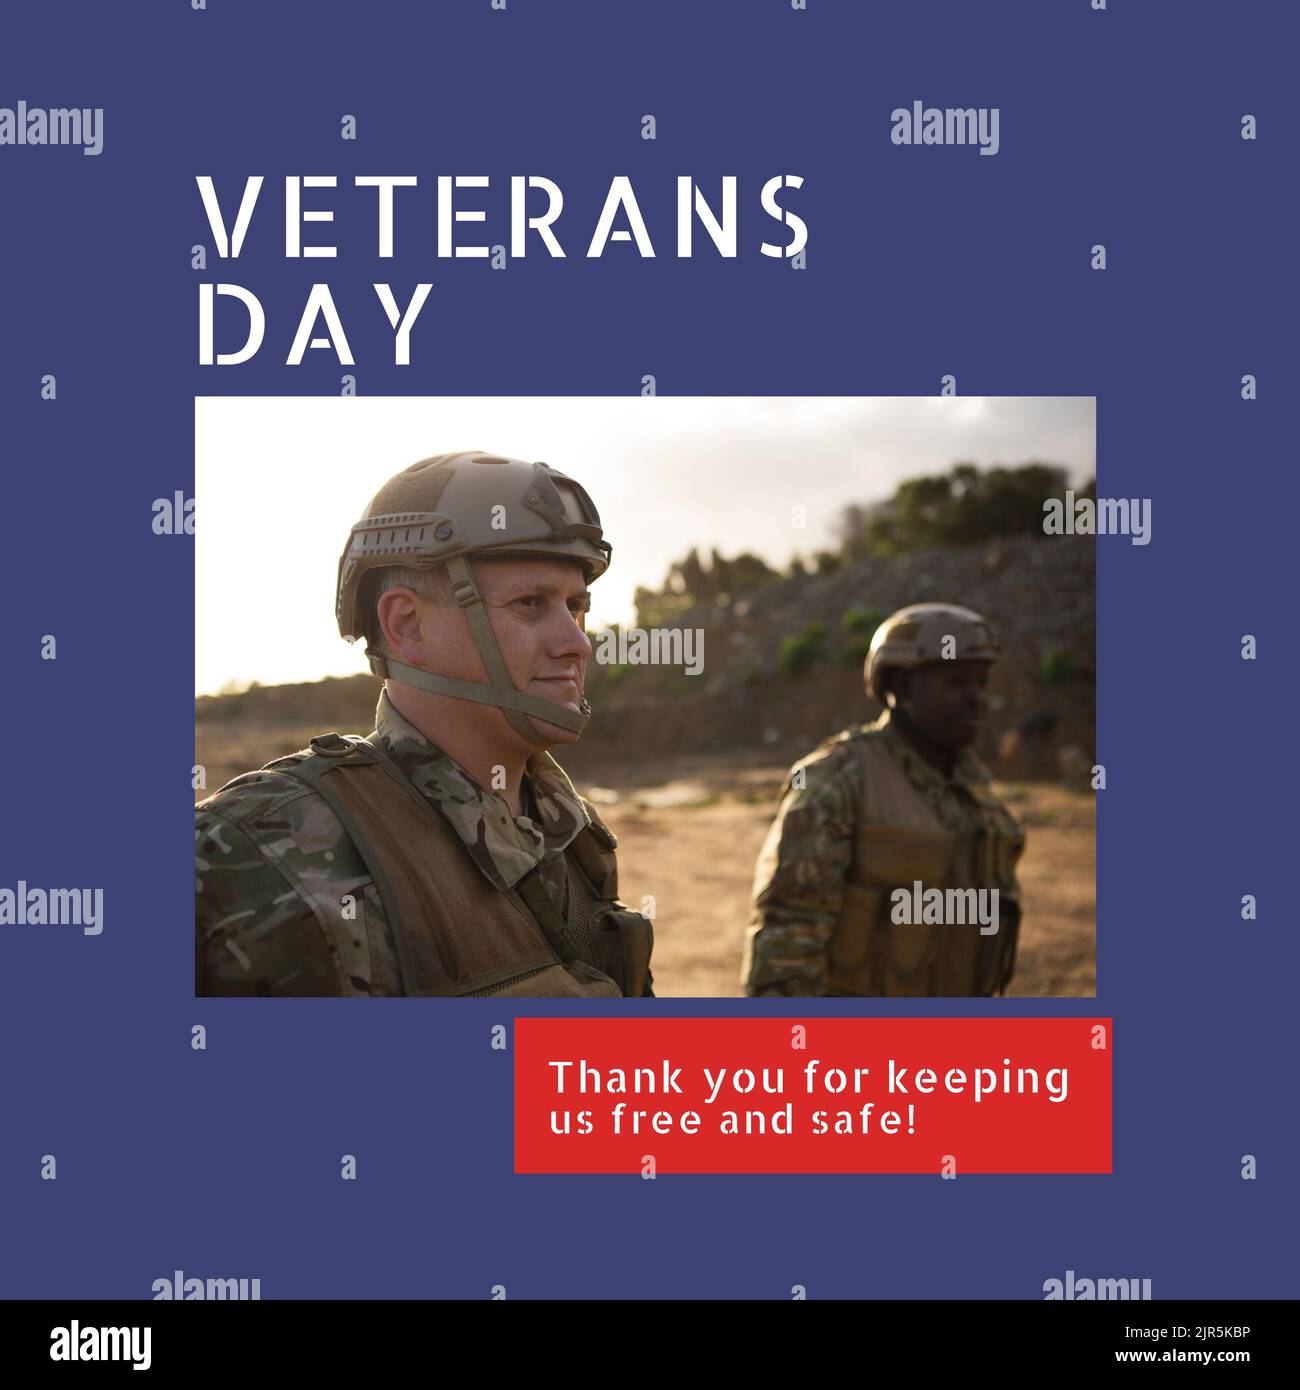 Composition of veterans day text over diverse male soldiers Stock Photo